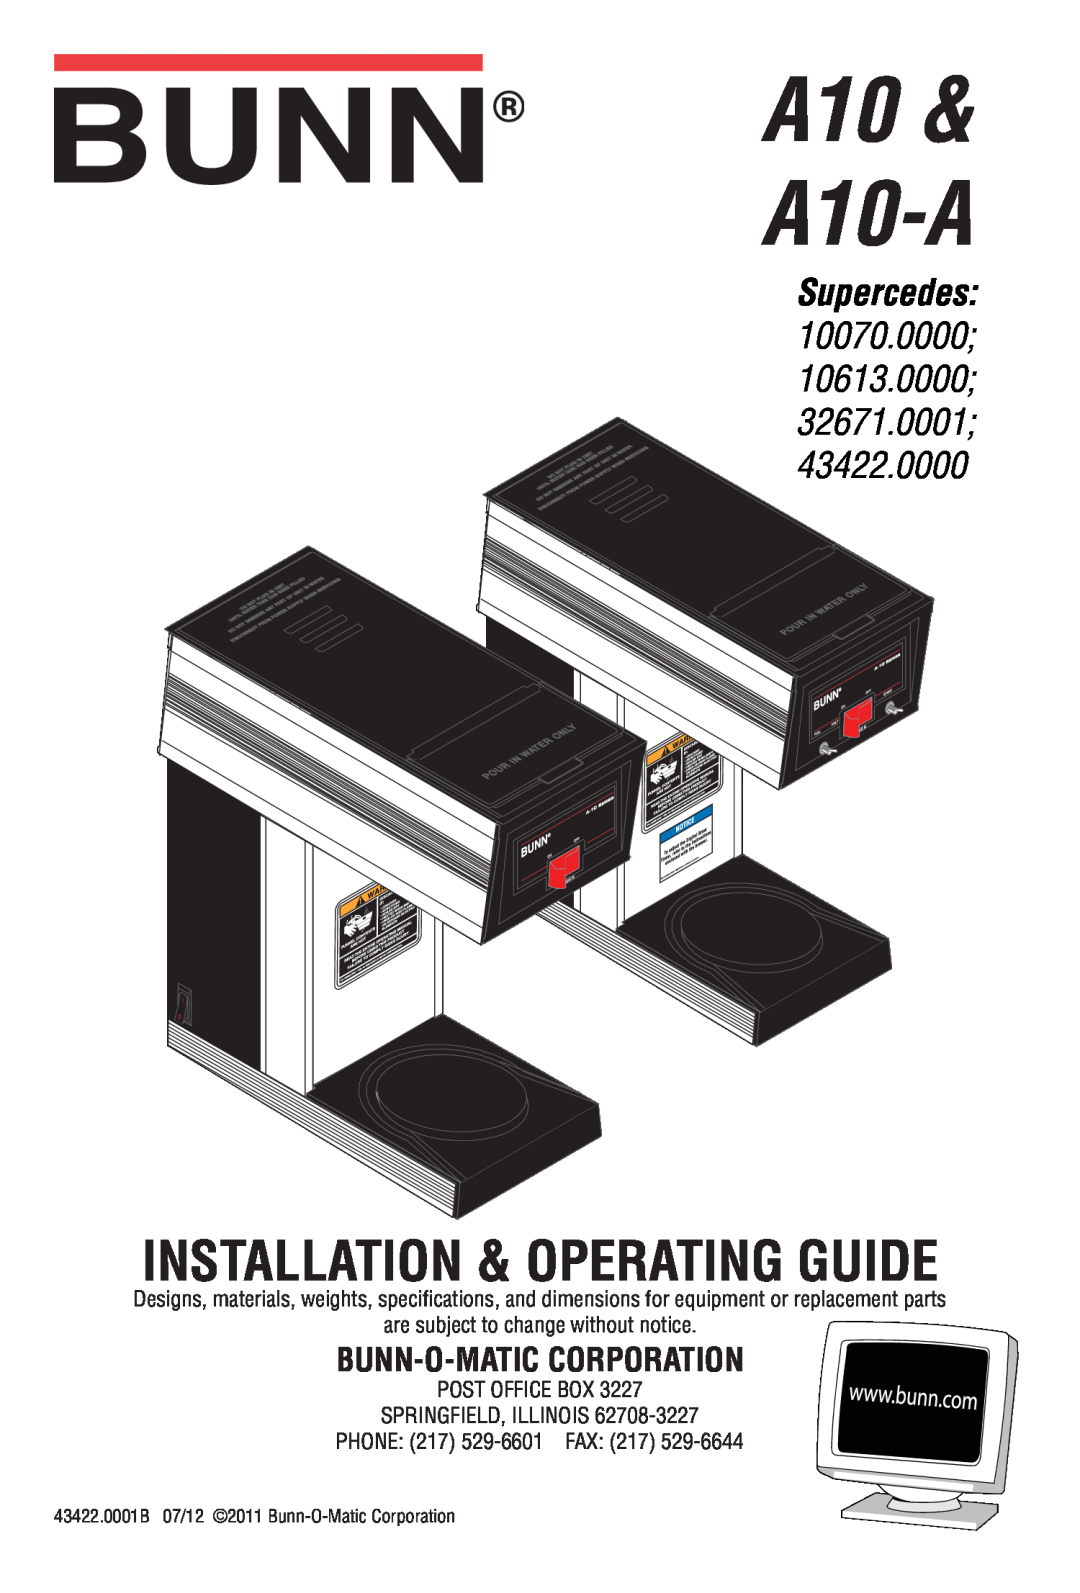 Bunn specifications A10 A10-A, Installation & Operating Guide, Supercedes, 10070.0000, Bunn-O-Matic Corporation 